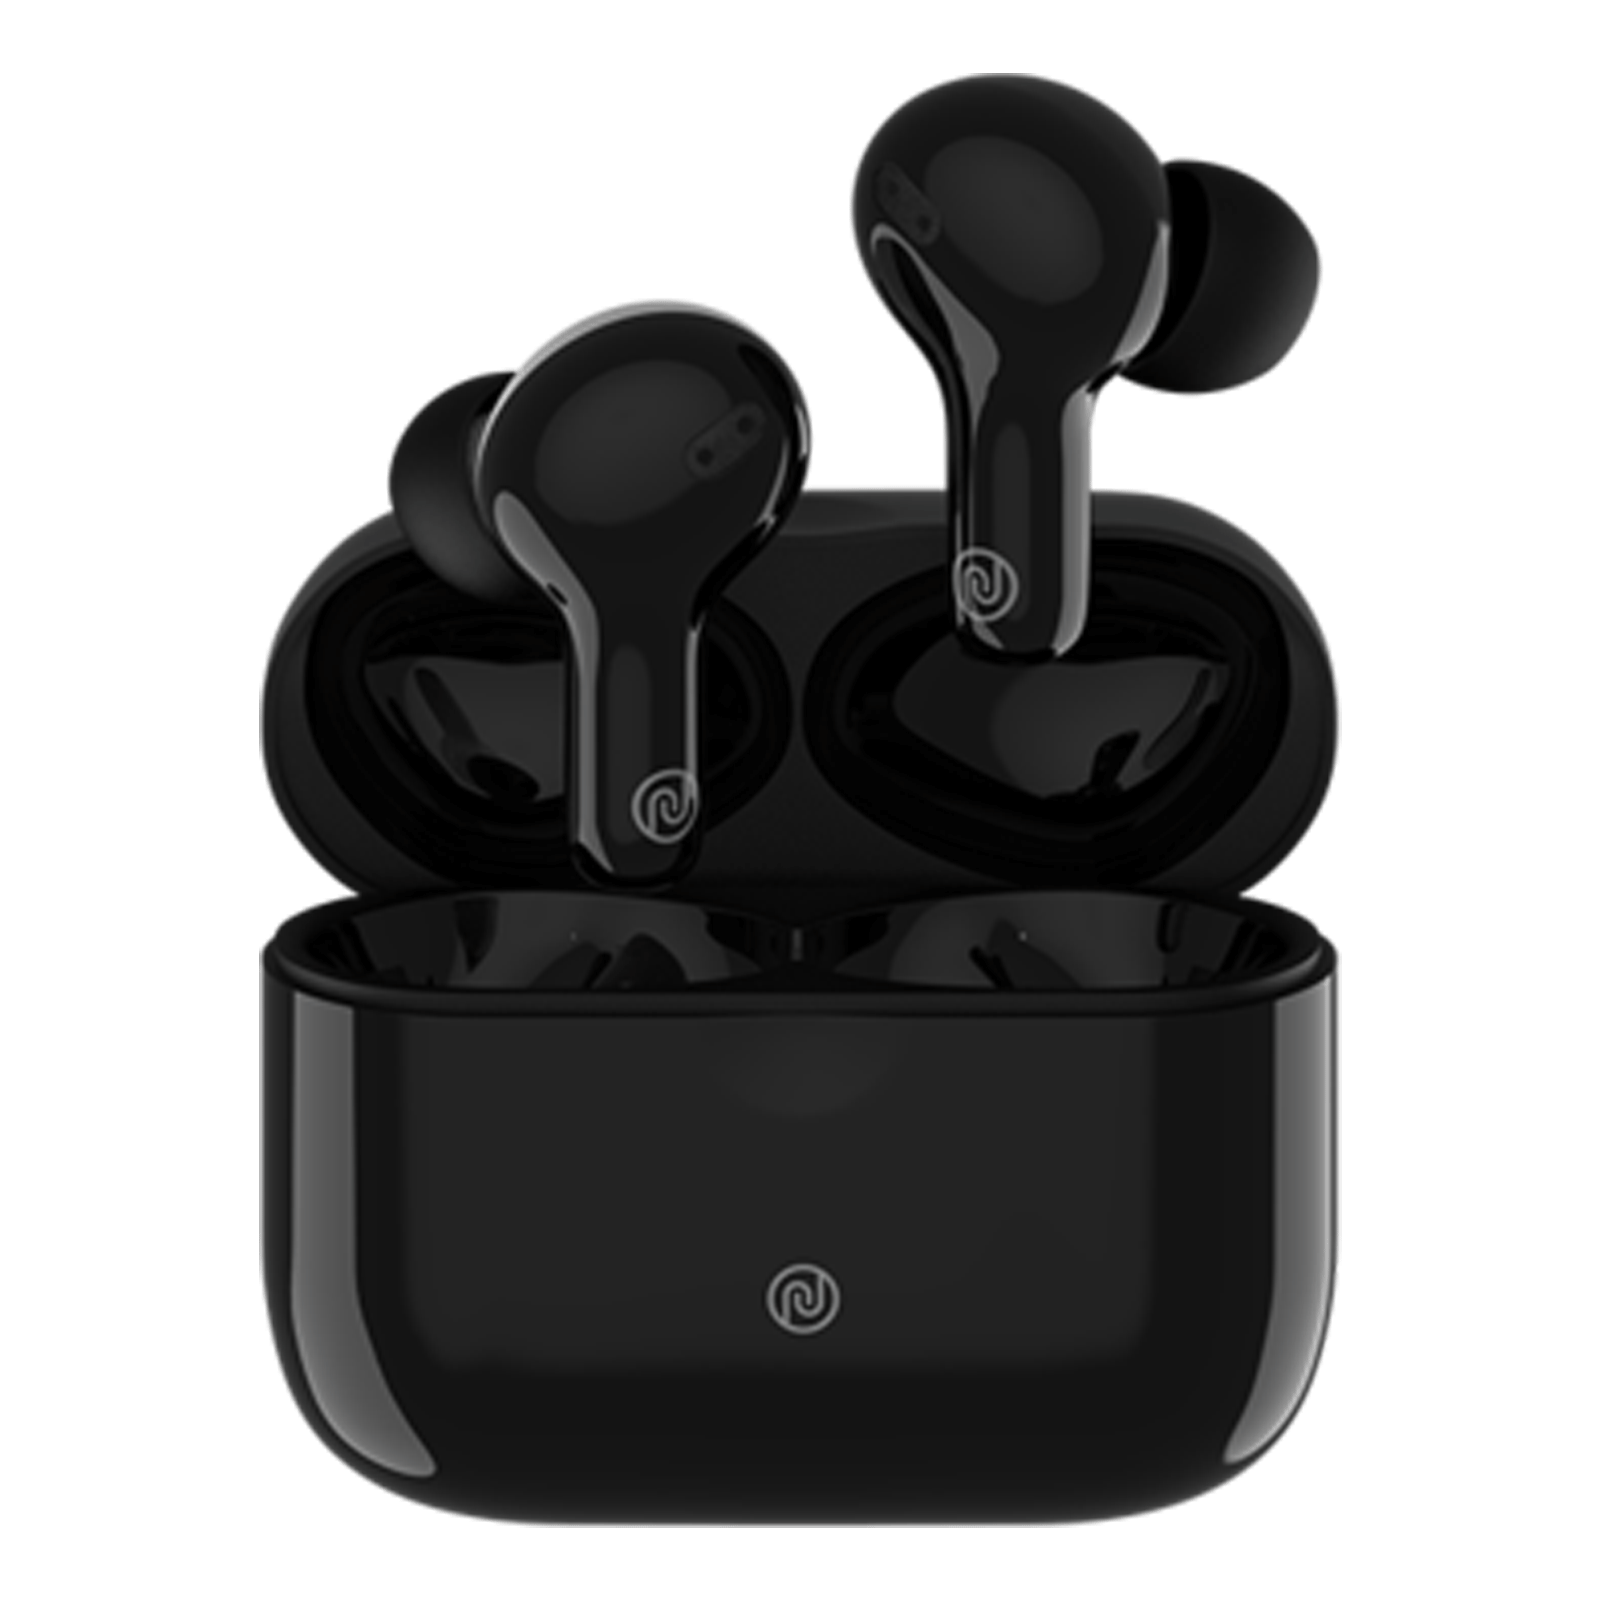 Noise Air Buds+ AUD-HDPHN-AIRBUDS+ In-Ear Truly Wireless Earbuds with Mic (Bluetooth 5.0, Hyper Sync Technology, Jet Black)_1